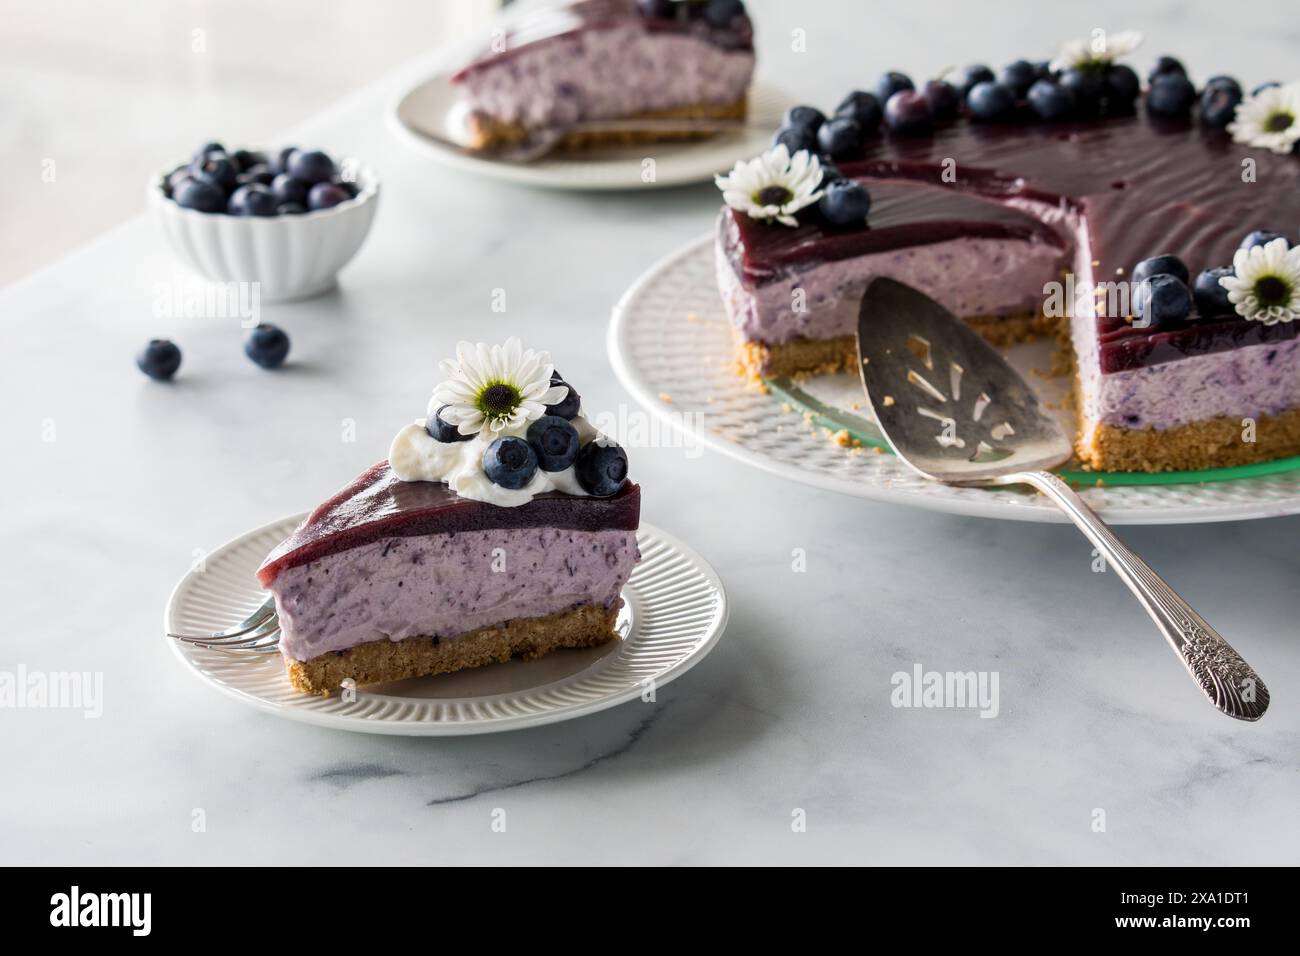 A close up of a homemade blueberry cheesecake with slices served. Stock Photo